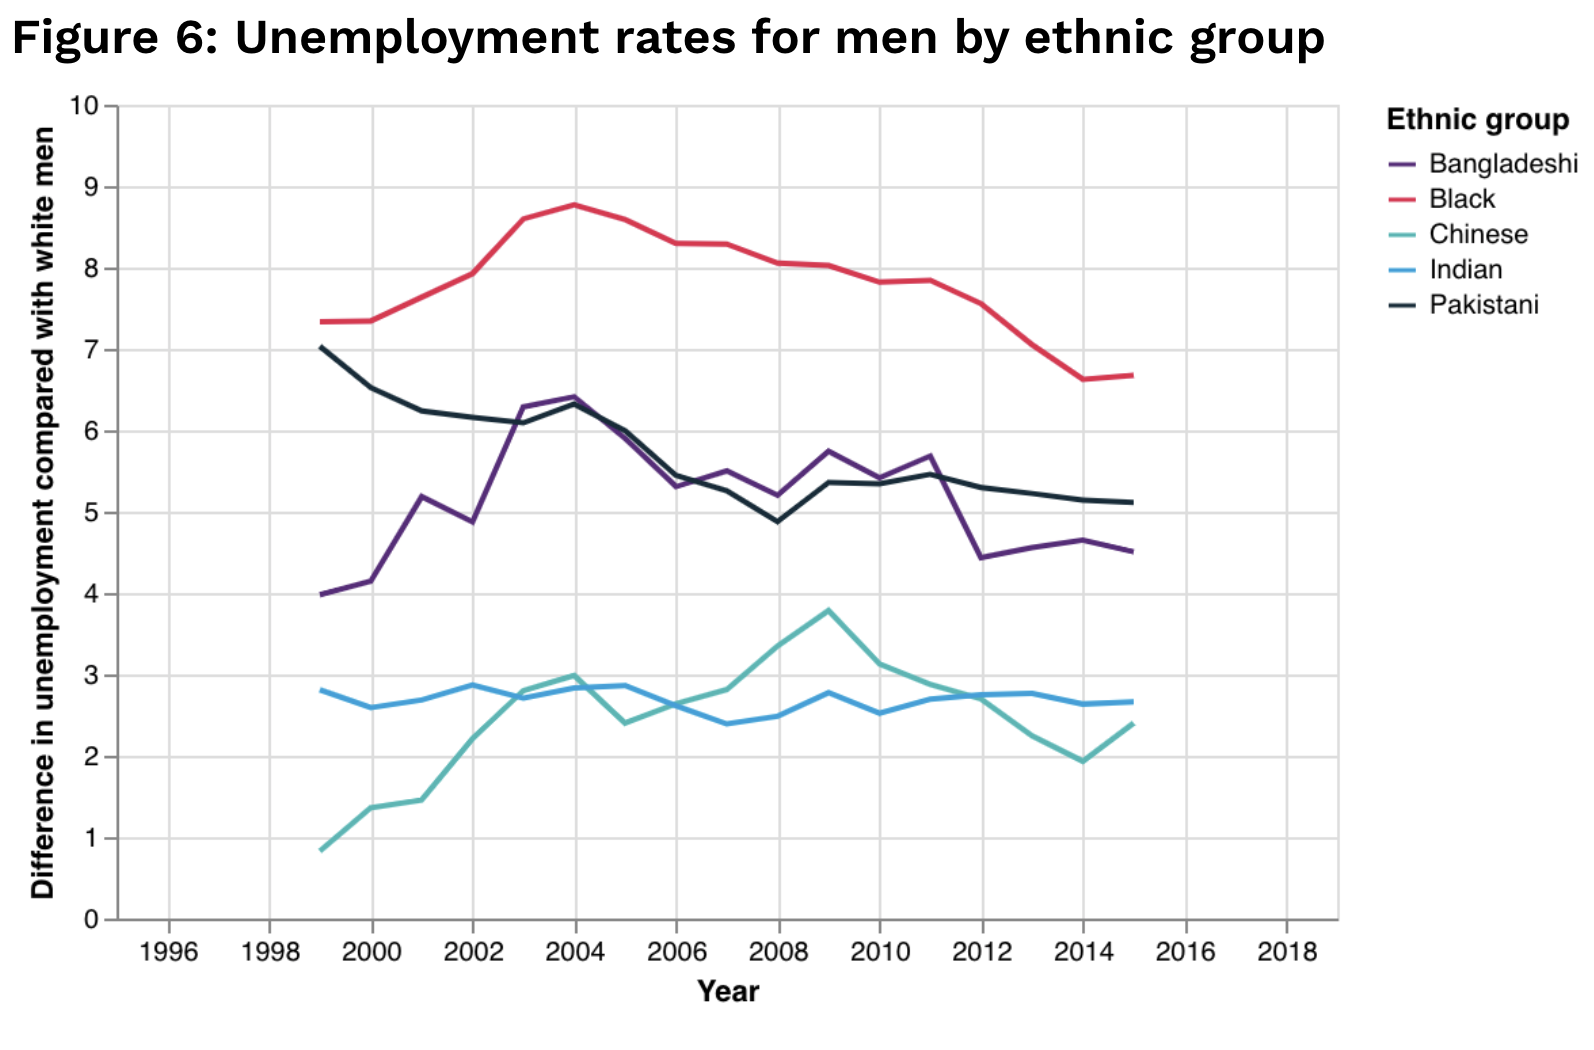 Contrary to the impression given by the Sewell Report, things for ethnic minorities in the UK labour market are not getting better